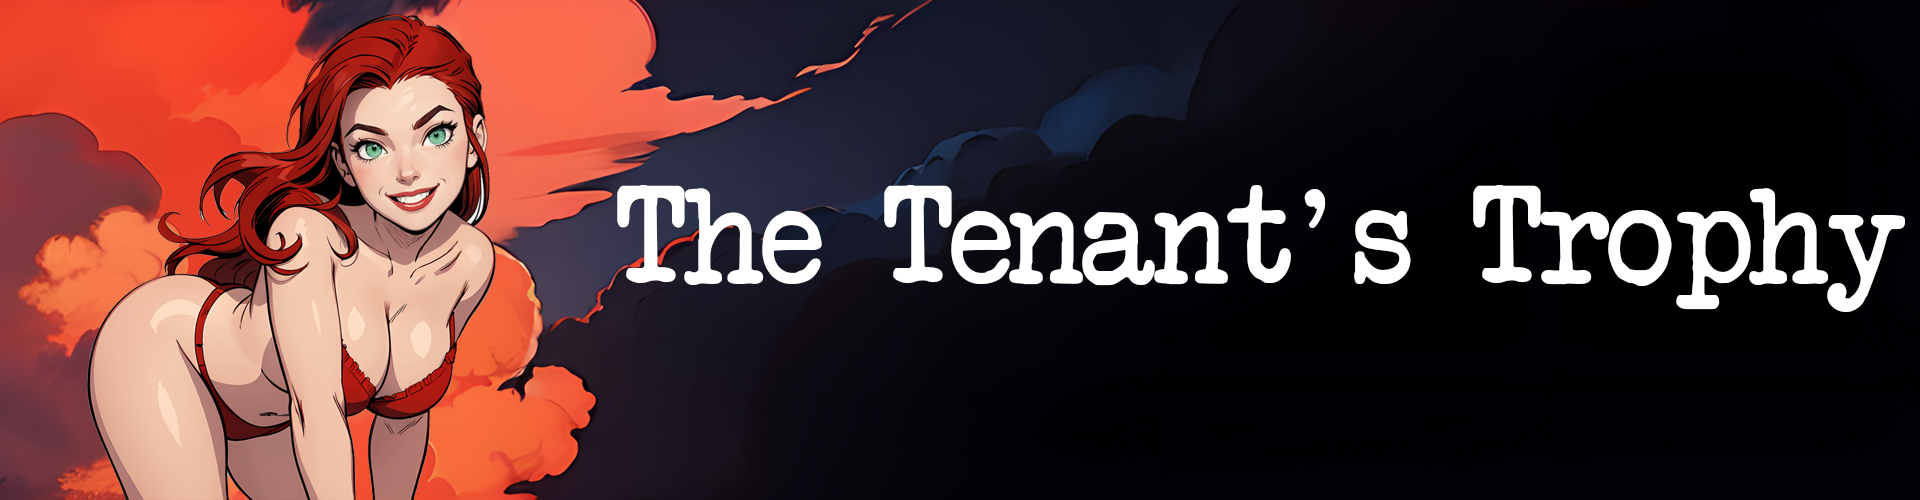 The Tenant's Trophy poster